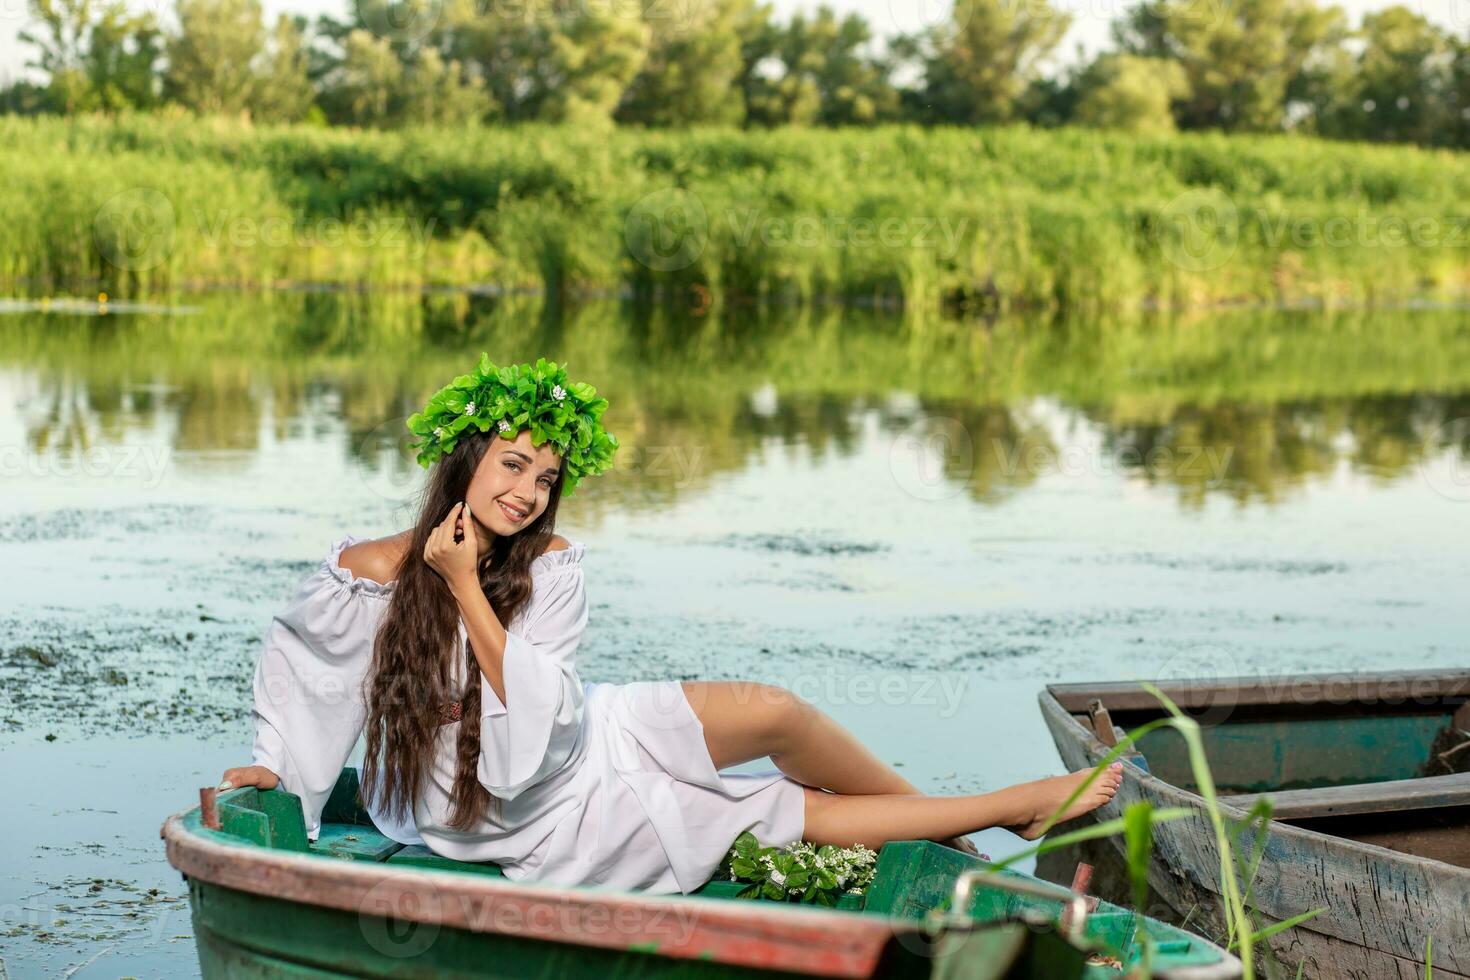 The nymph with long dark hair in a white vintage dress sitting in a boat in the middle of the river. photo